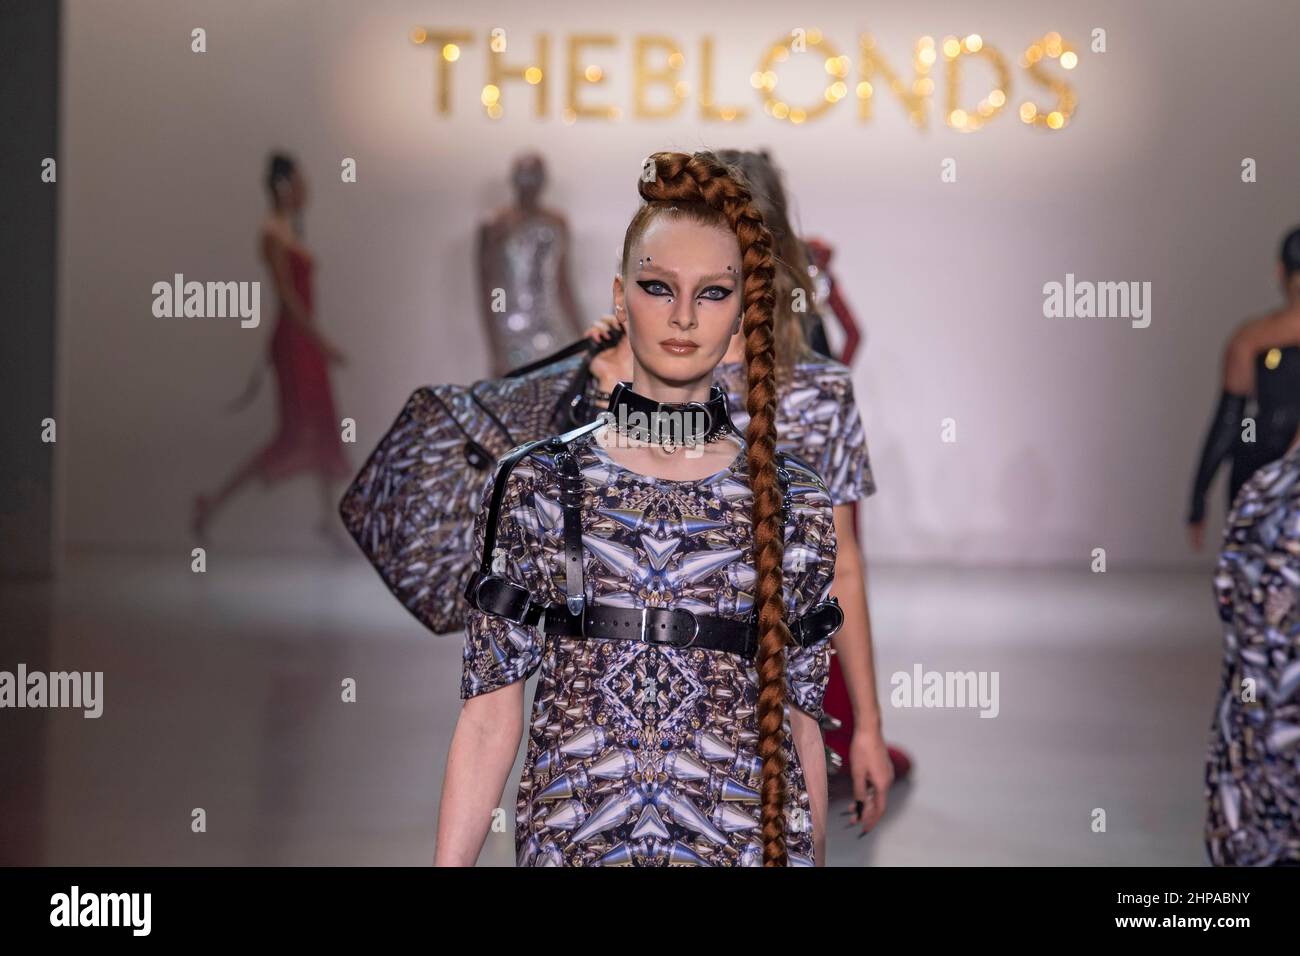 NEW YORK, NY - FEBRUARY 16, 2022: Models walk the runway for The Blonds during New York Fashion Week: The Shows at Spring Studios. Stock Photo